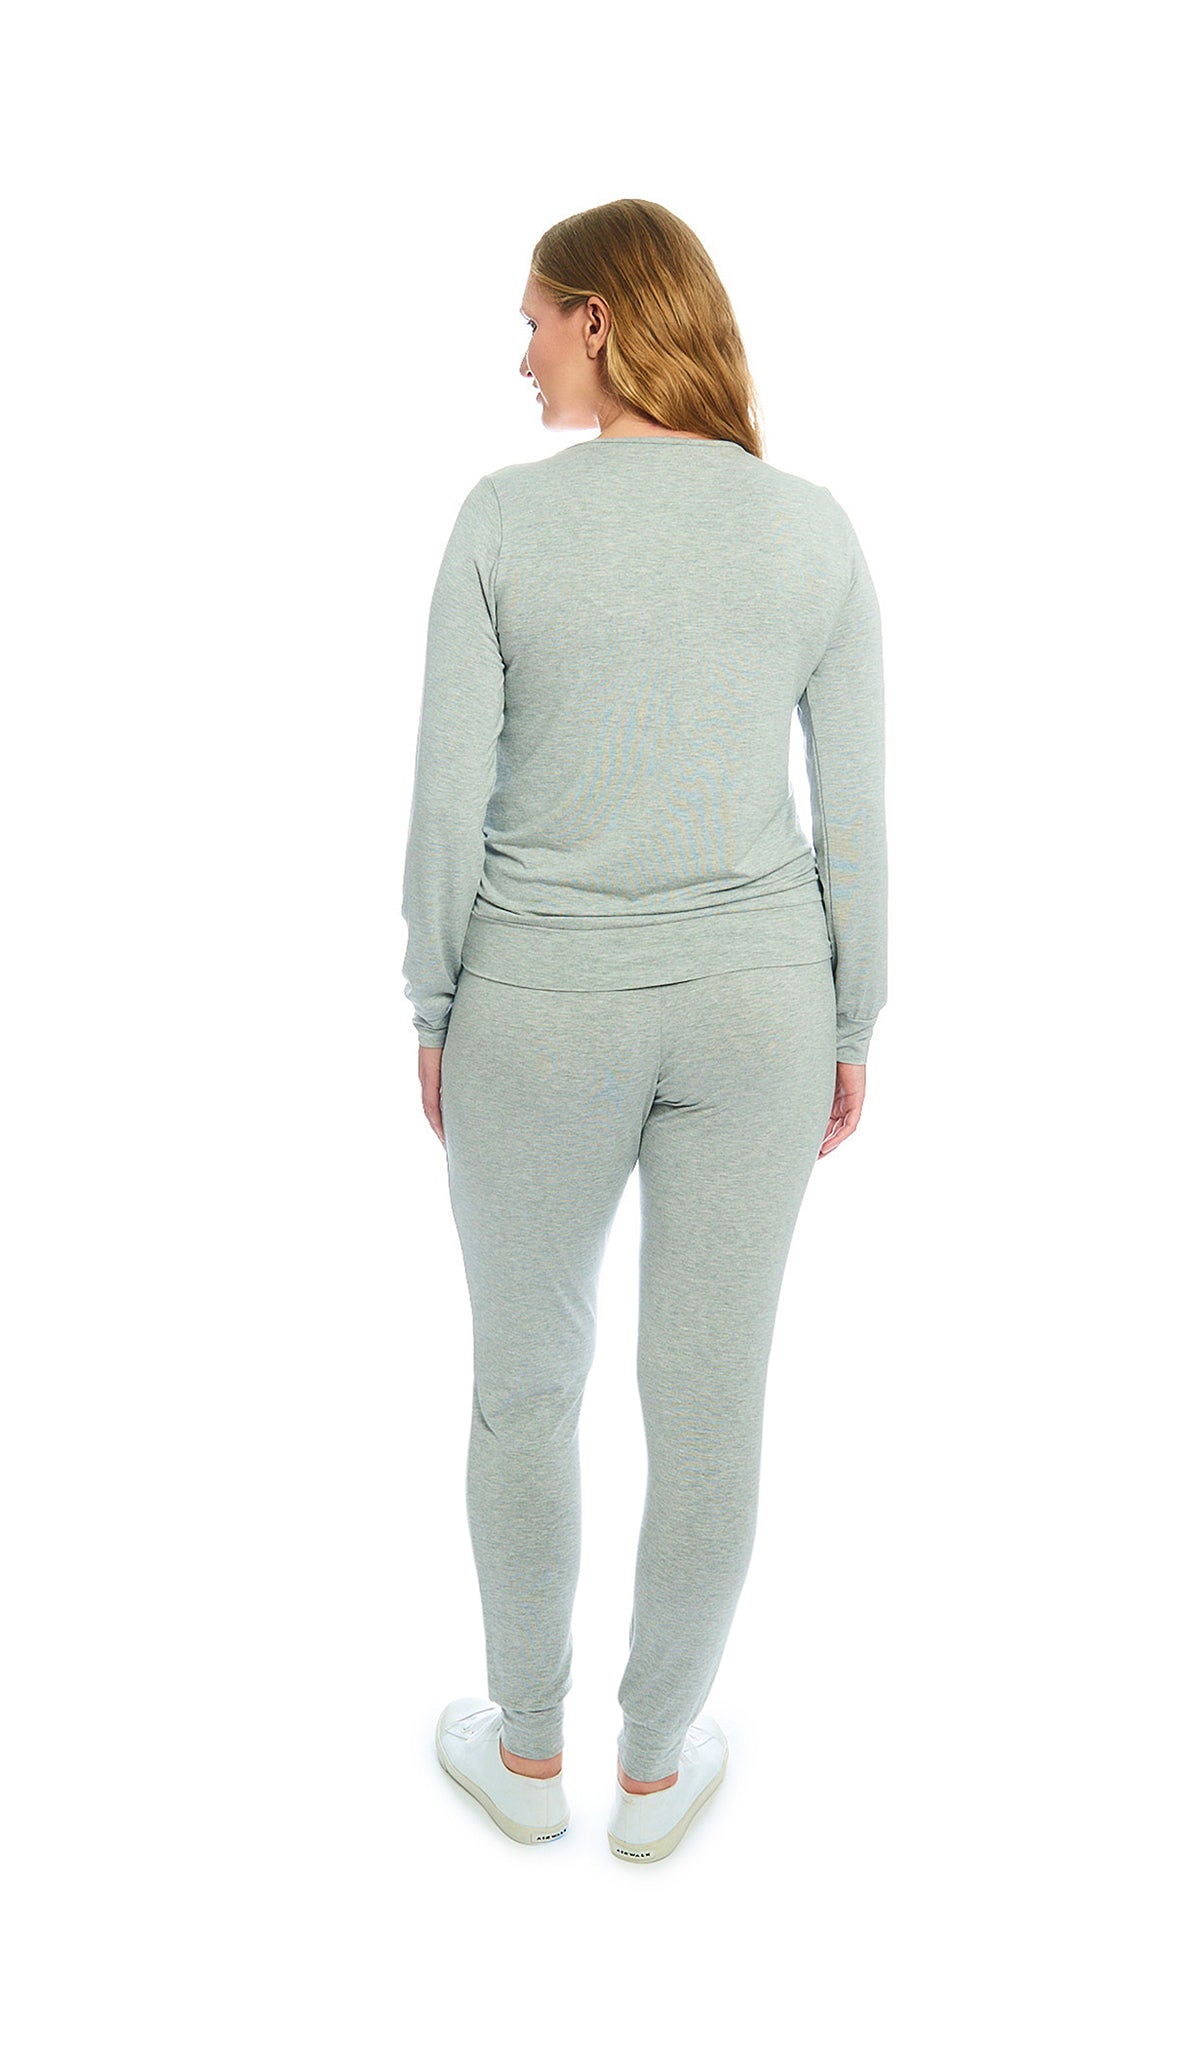 Heather Grey Solid Whitney 2-Piece back view on figure showing long sleeve top and long pant with cuff hem.